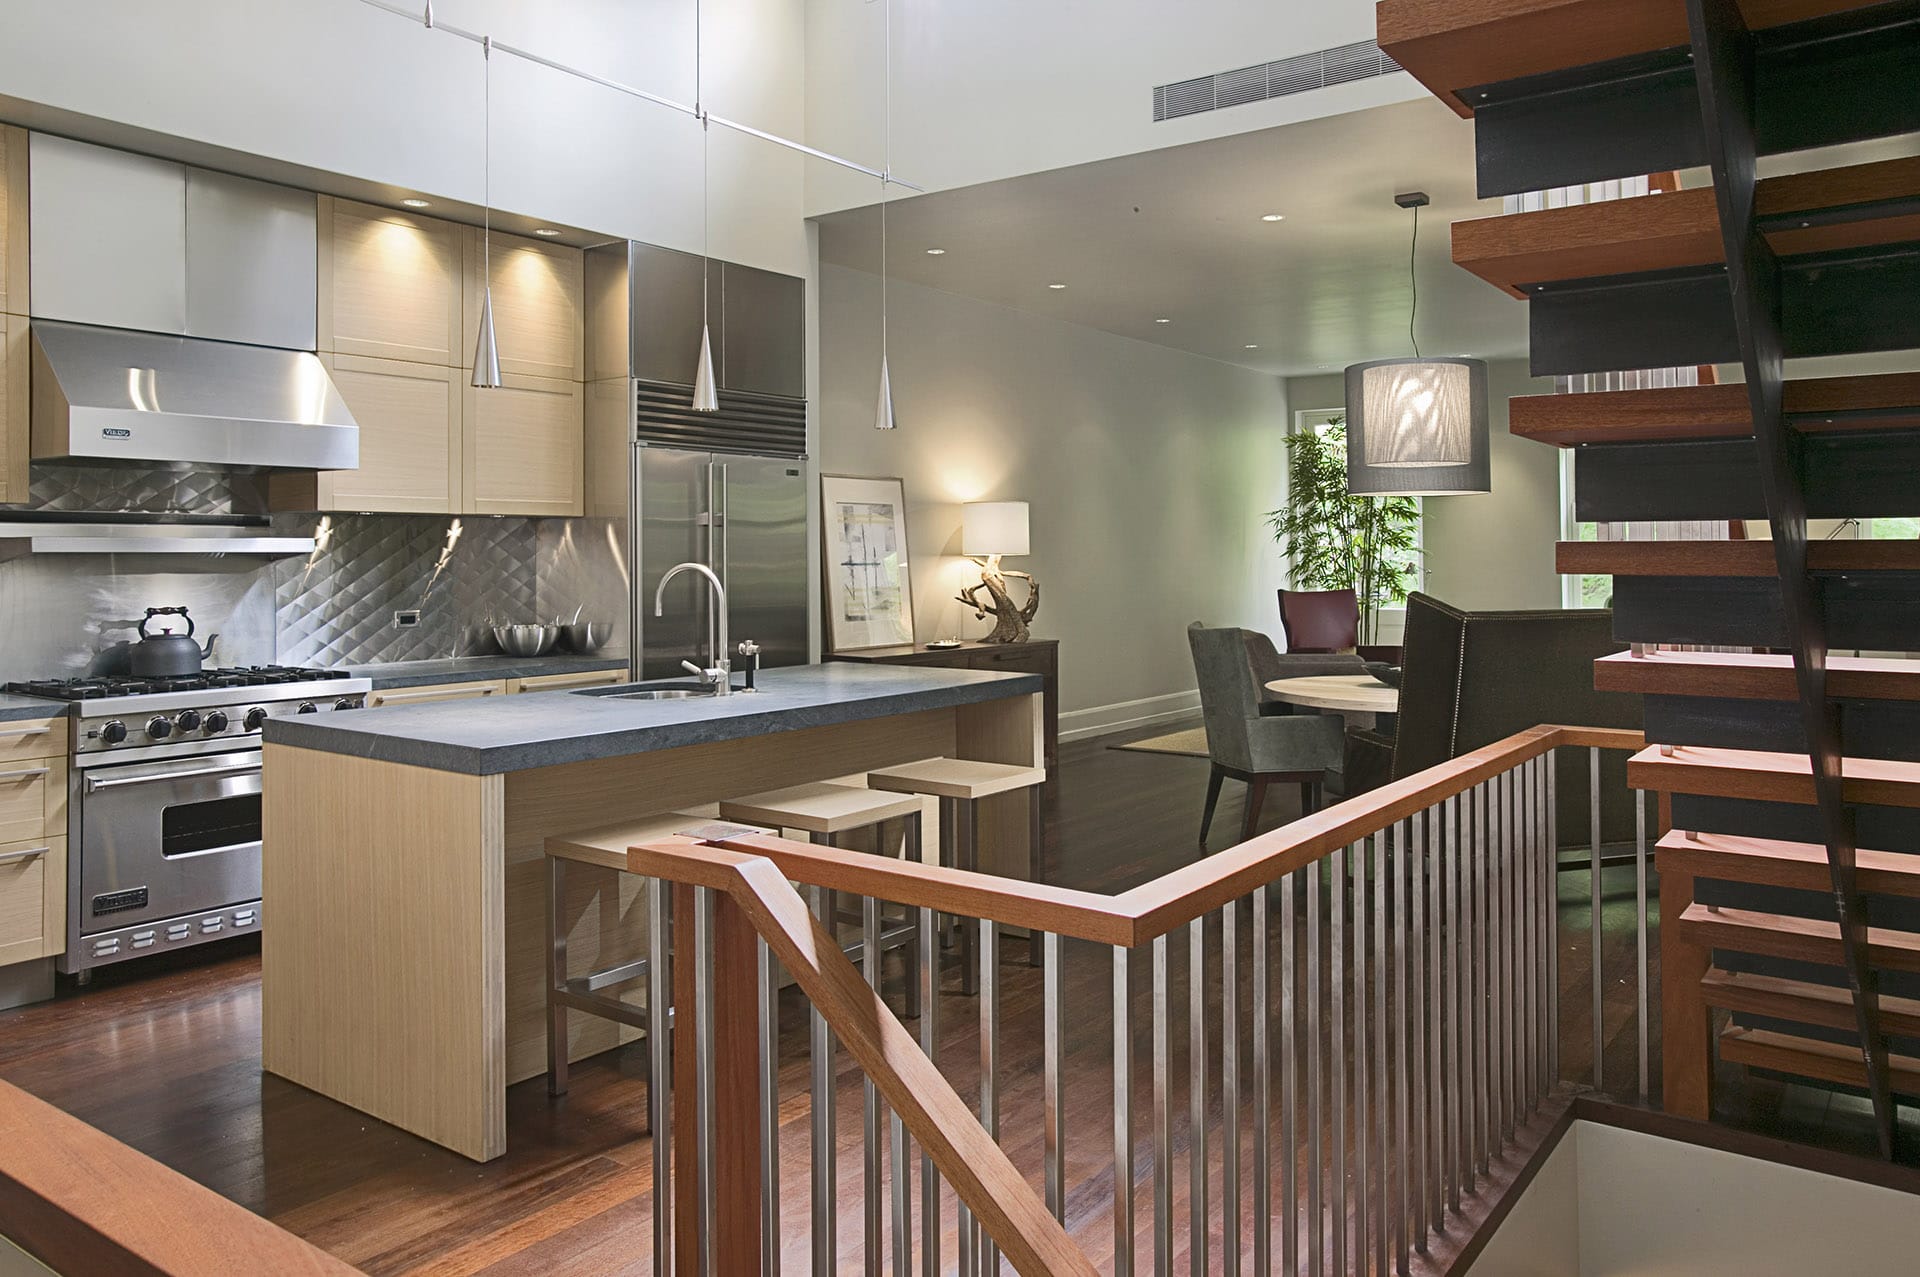 Modern double-height kitchen with dark wood floors, light wood cabinetry and island, and stainless steel backsplash and appliances. A open-stringer, open-riser modern staircase is at the right foreground.